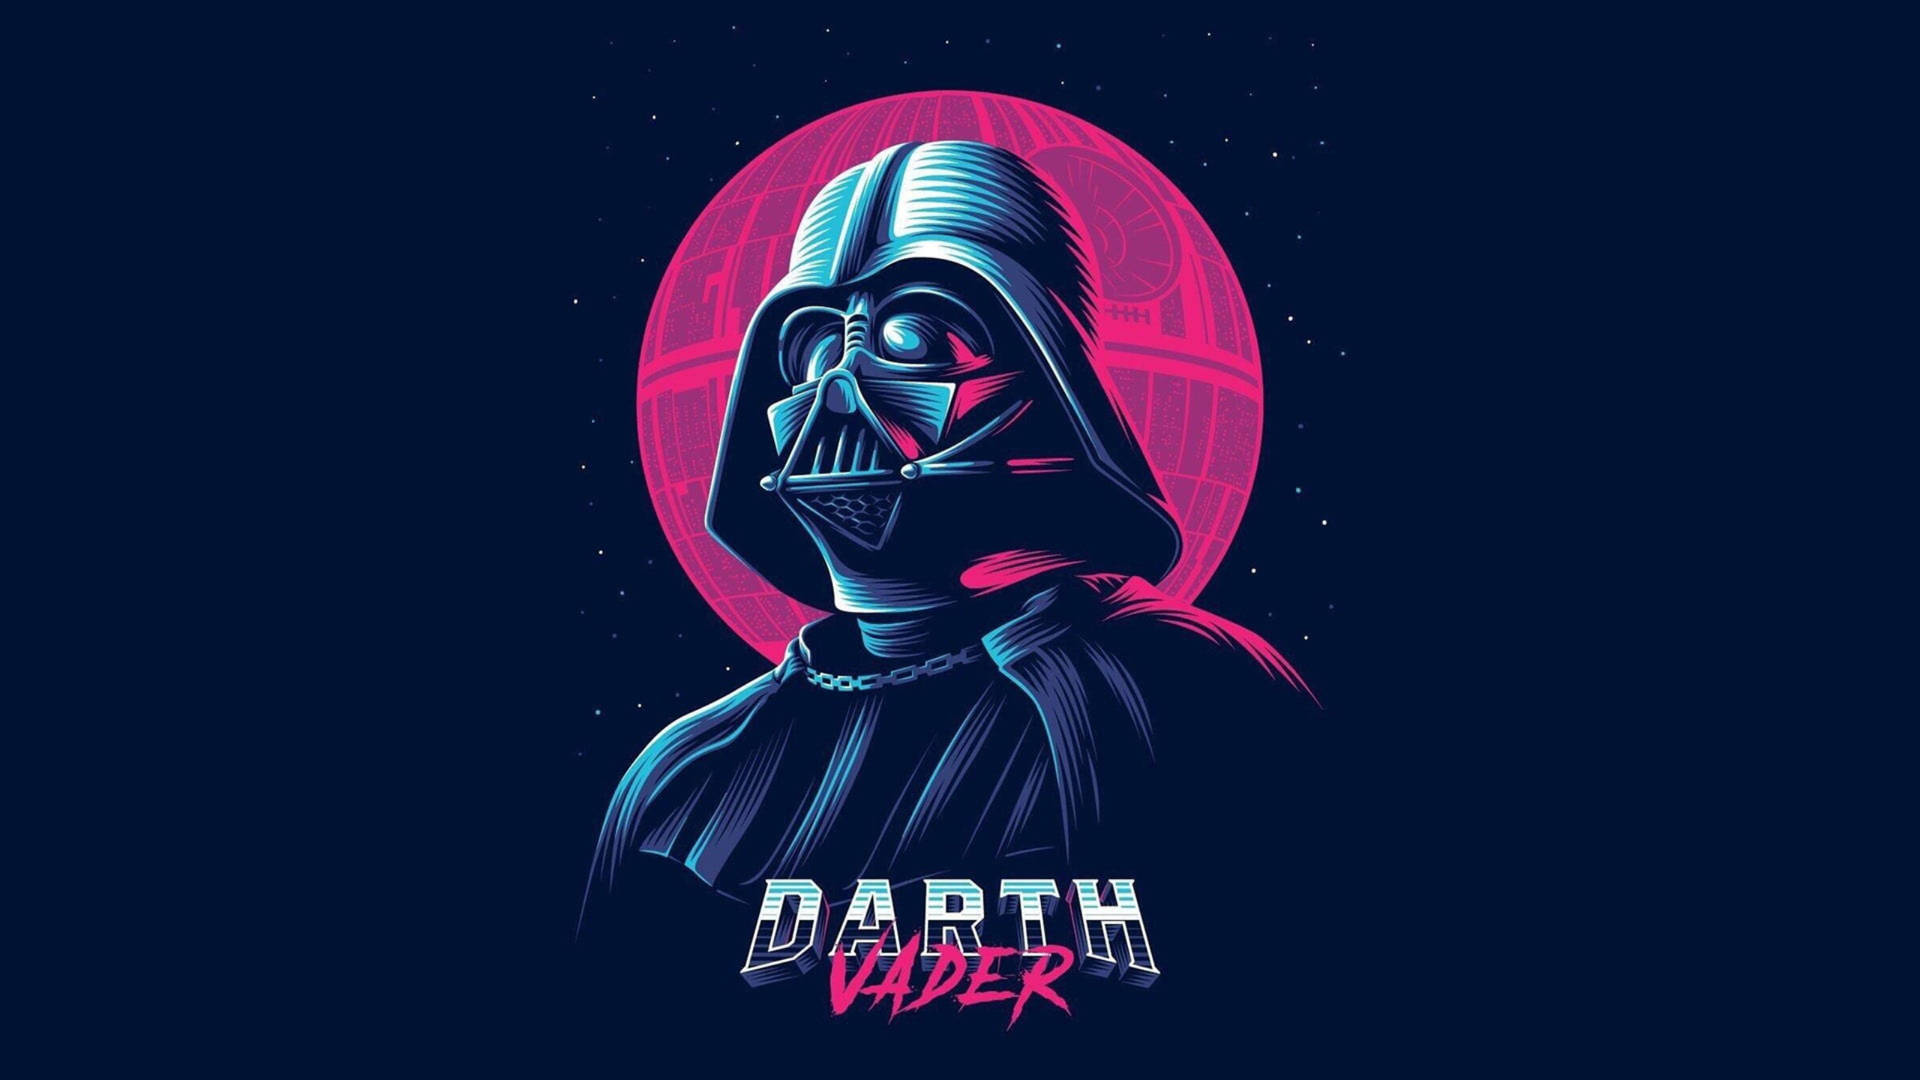 Stay Connected To The Dark Side With Whatsapp And Darth Vader